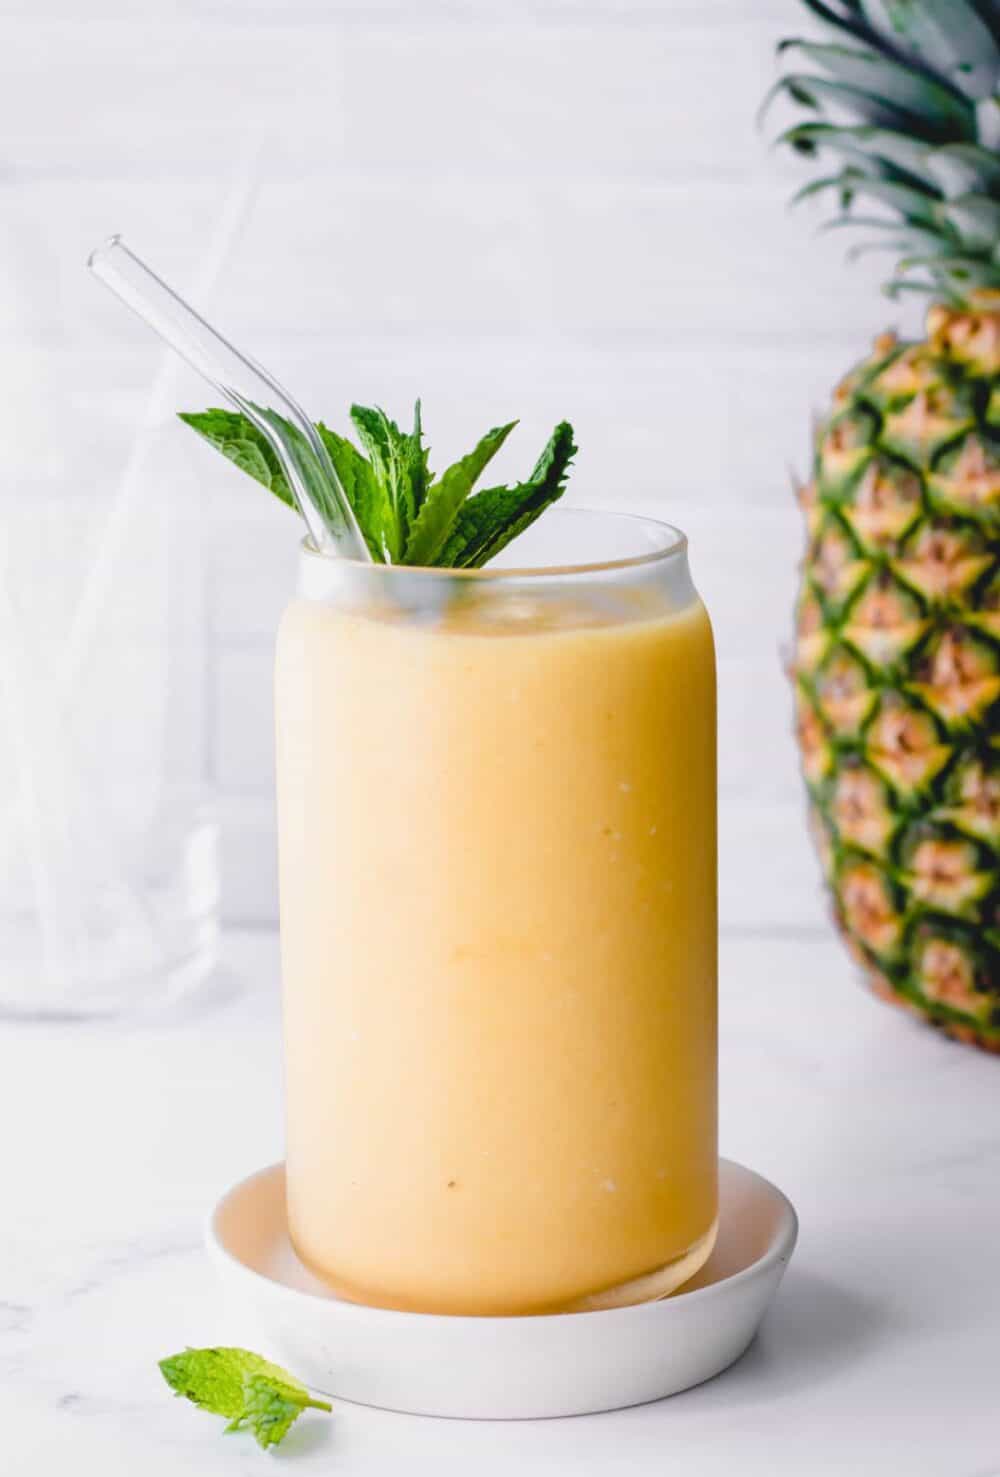 A mango pineapple smoothie topped with mint leaves and a straw.